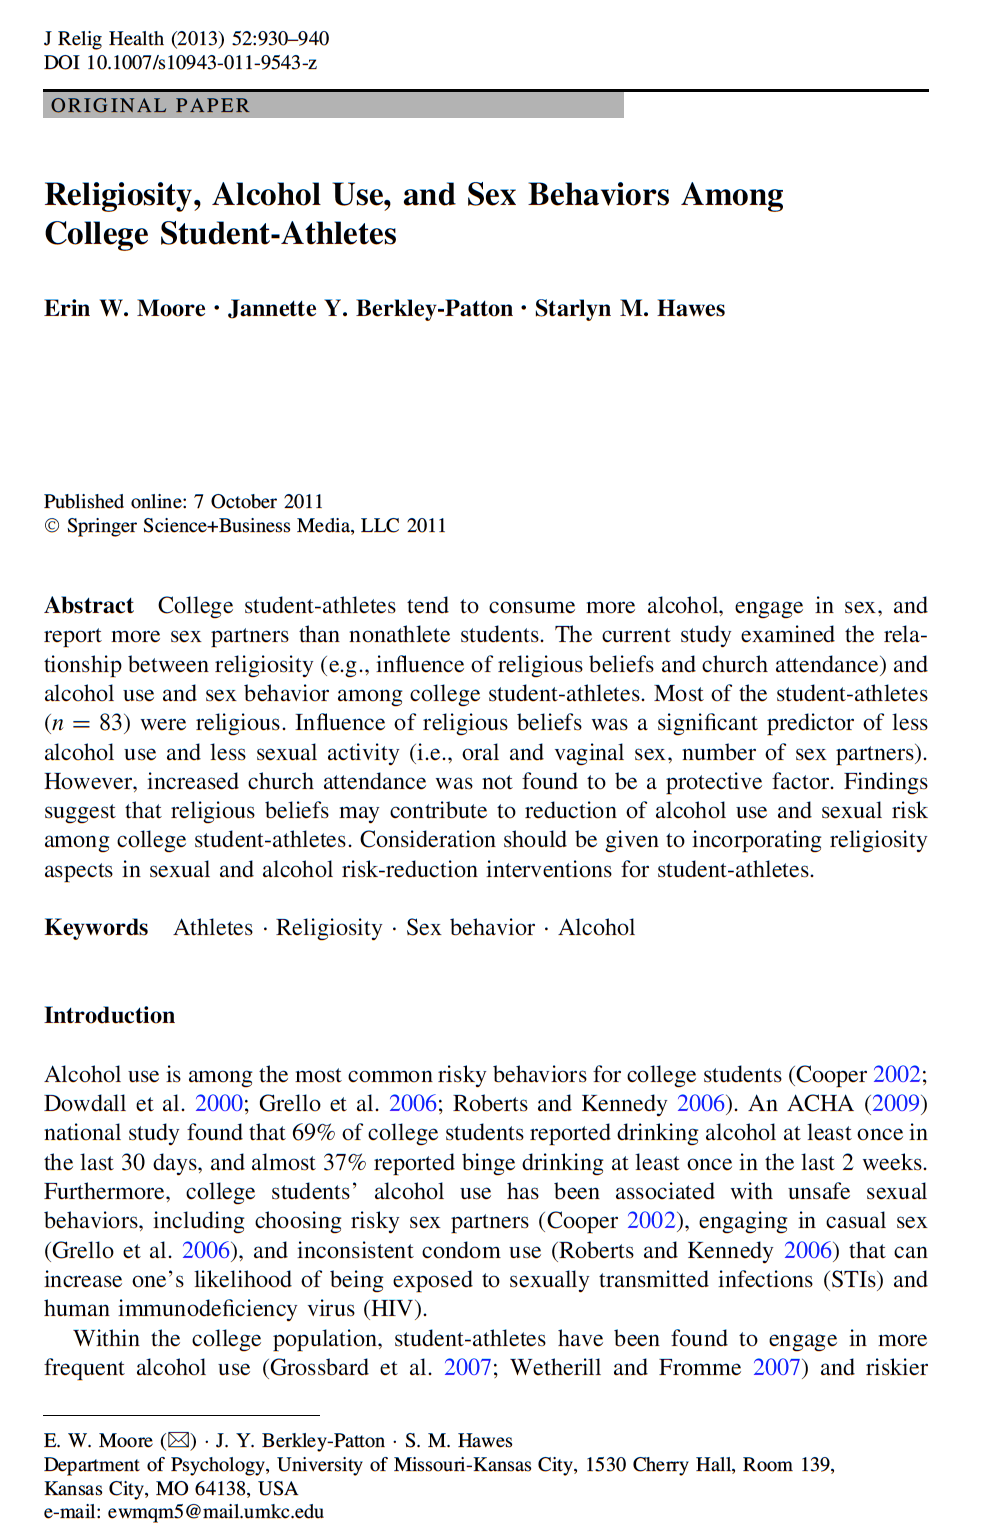 research article sample